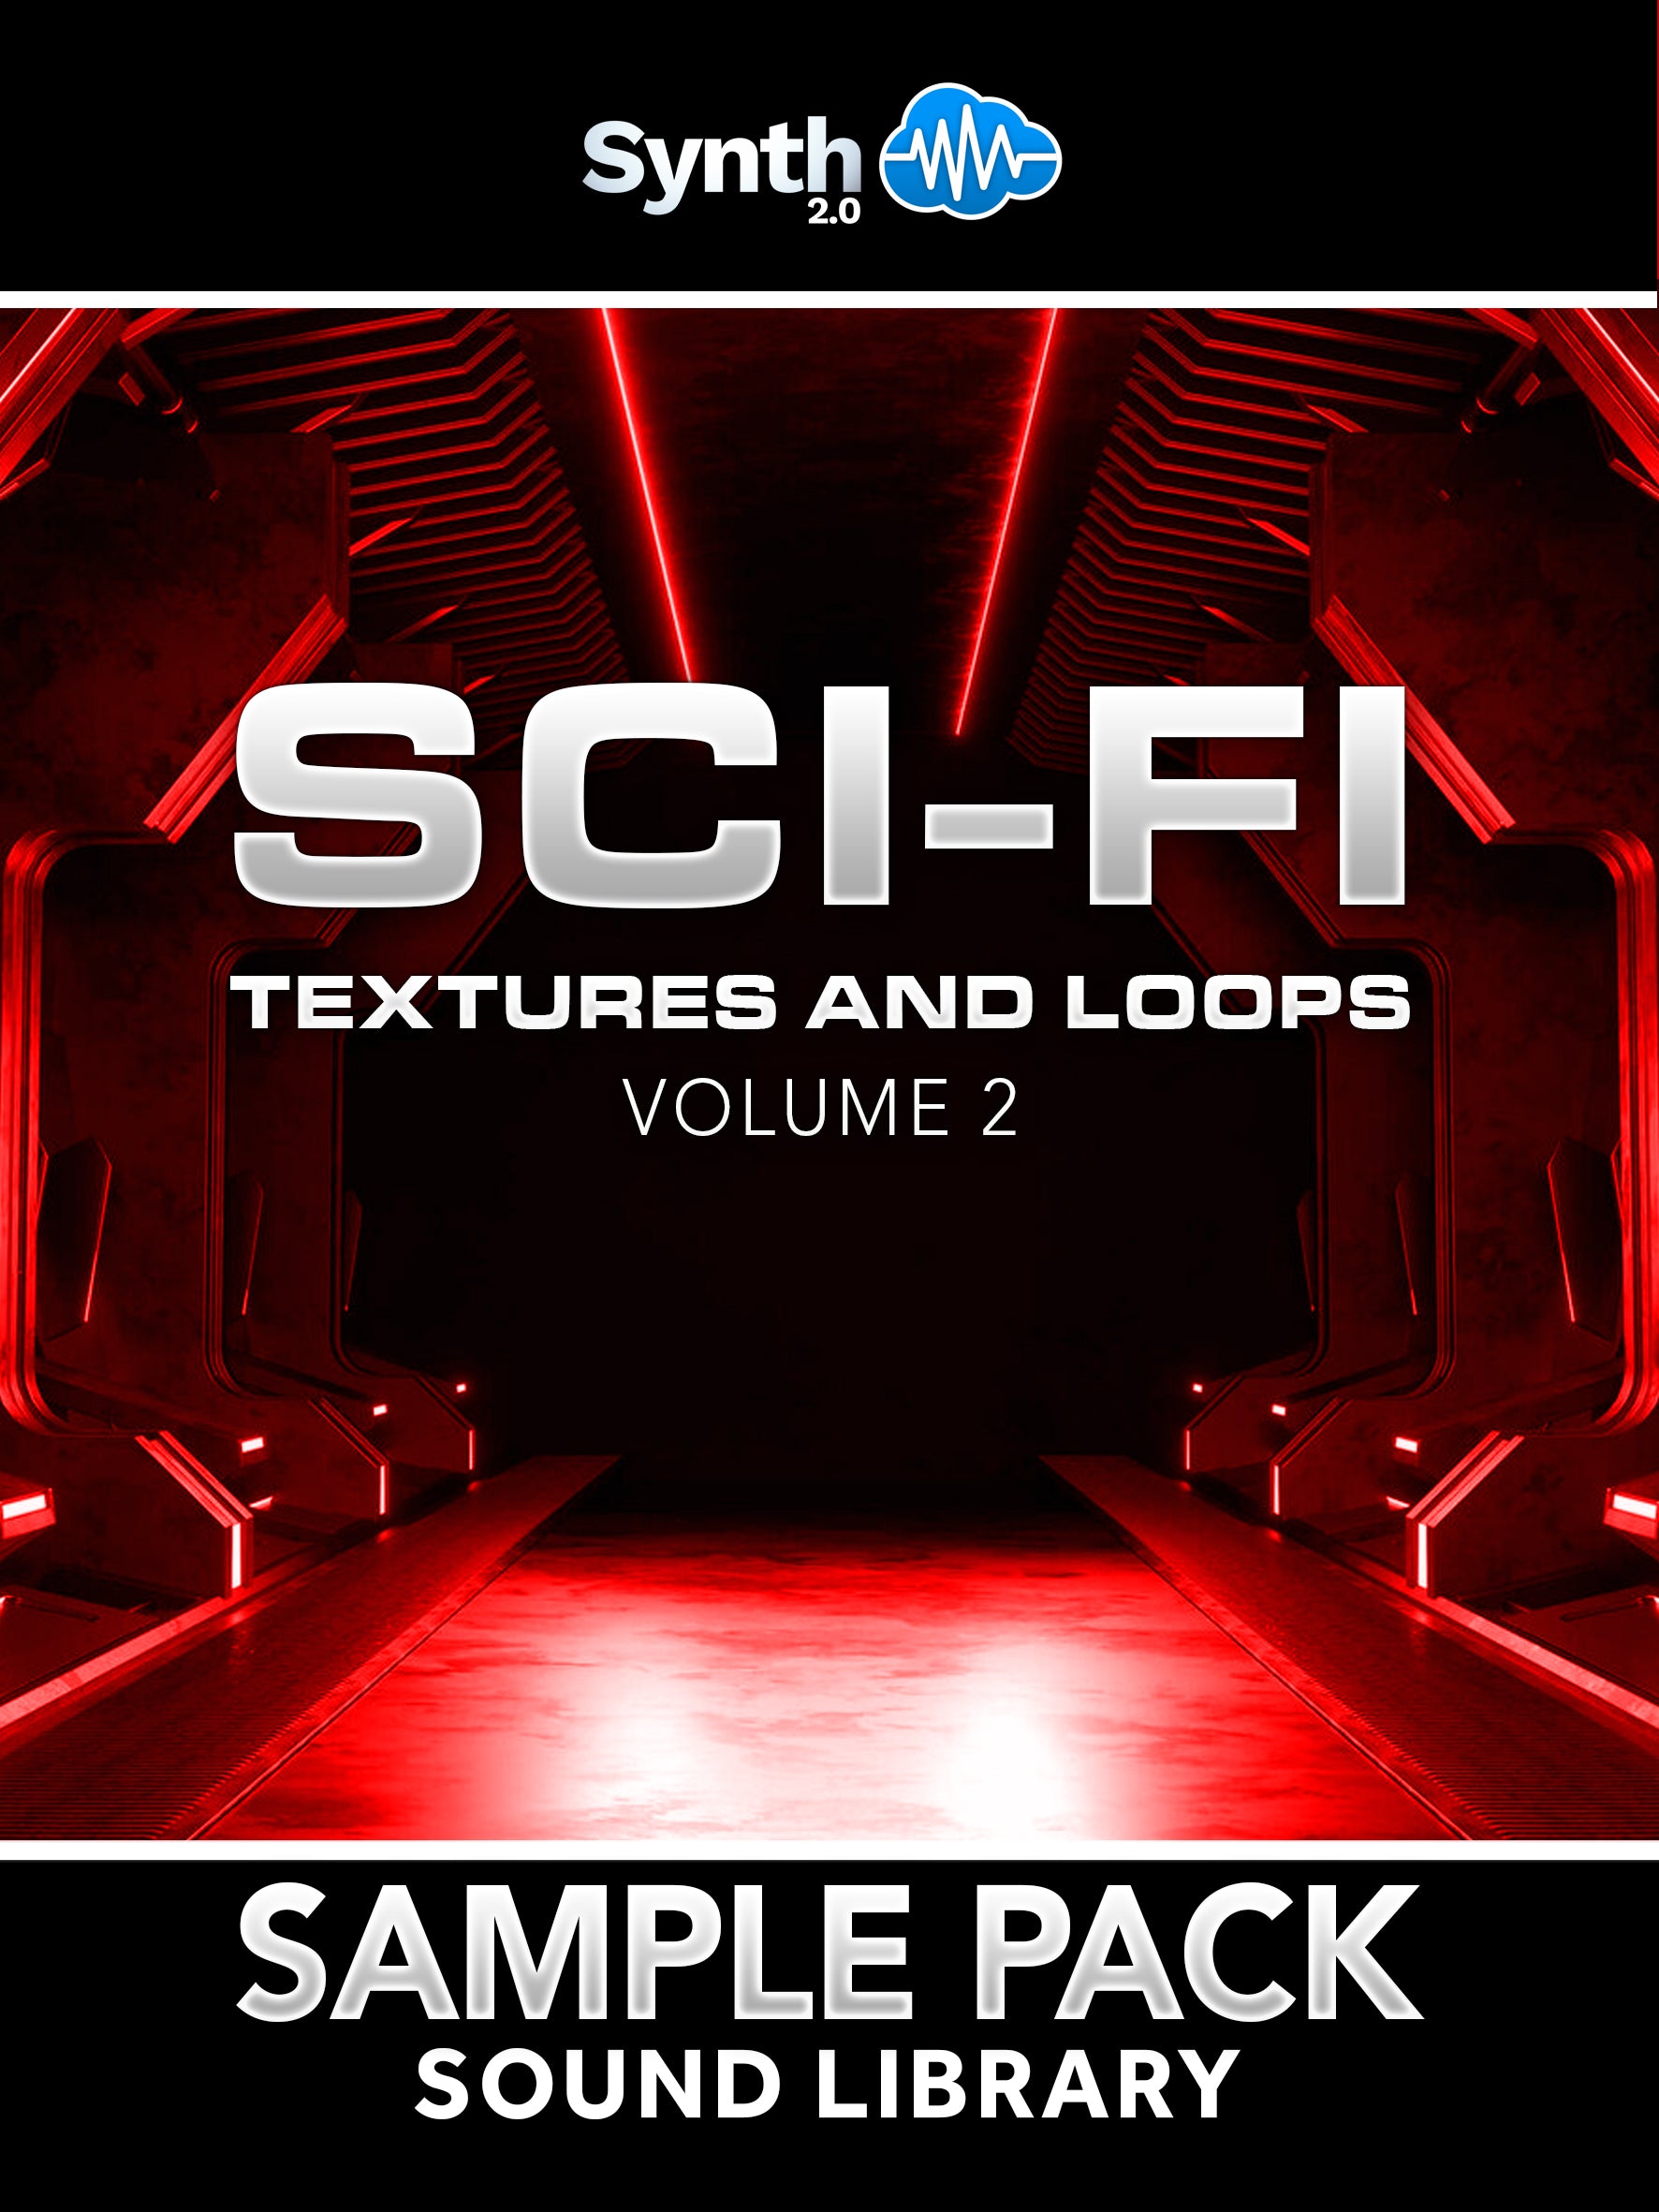 MDL007 - Sci-Fi Textures and Loops Vol.2 ( 260 samples )